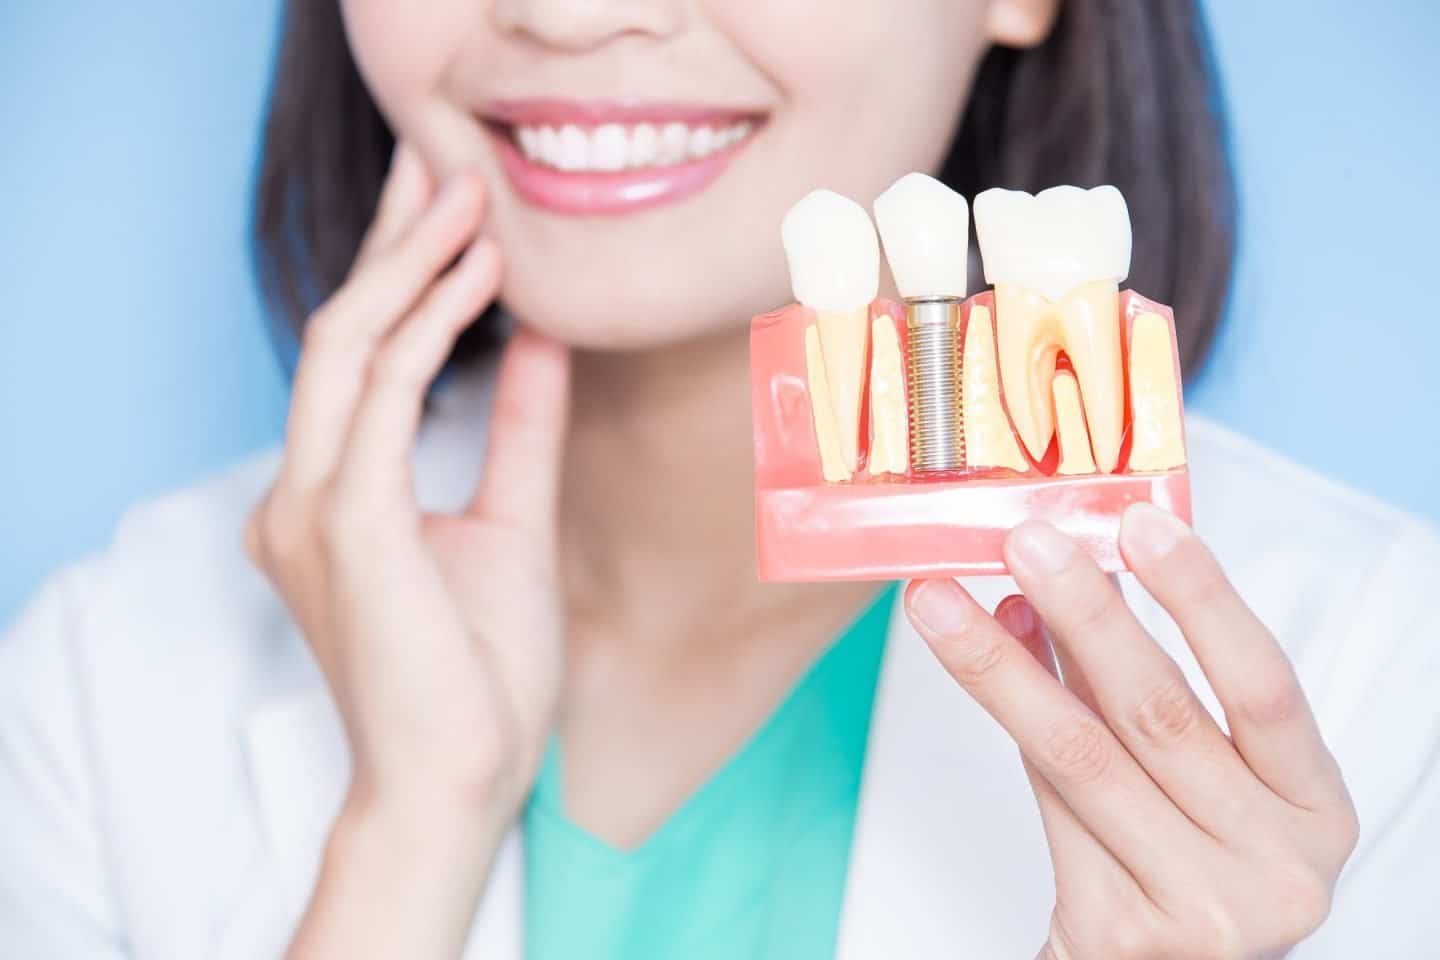 Types of Dental Implants & Techniques